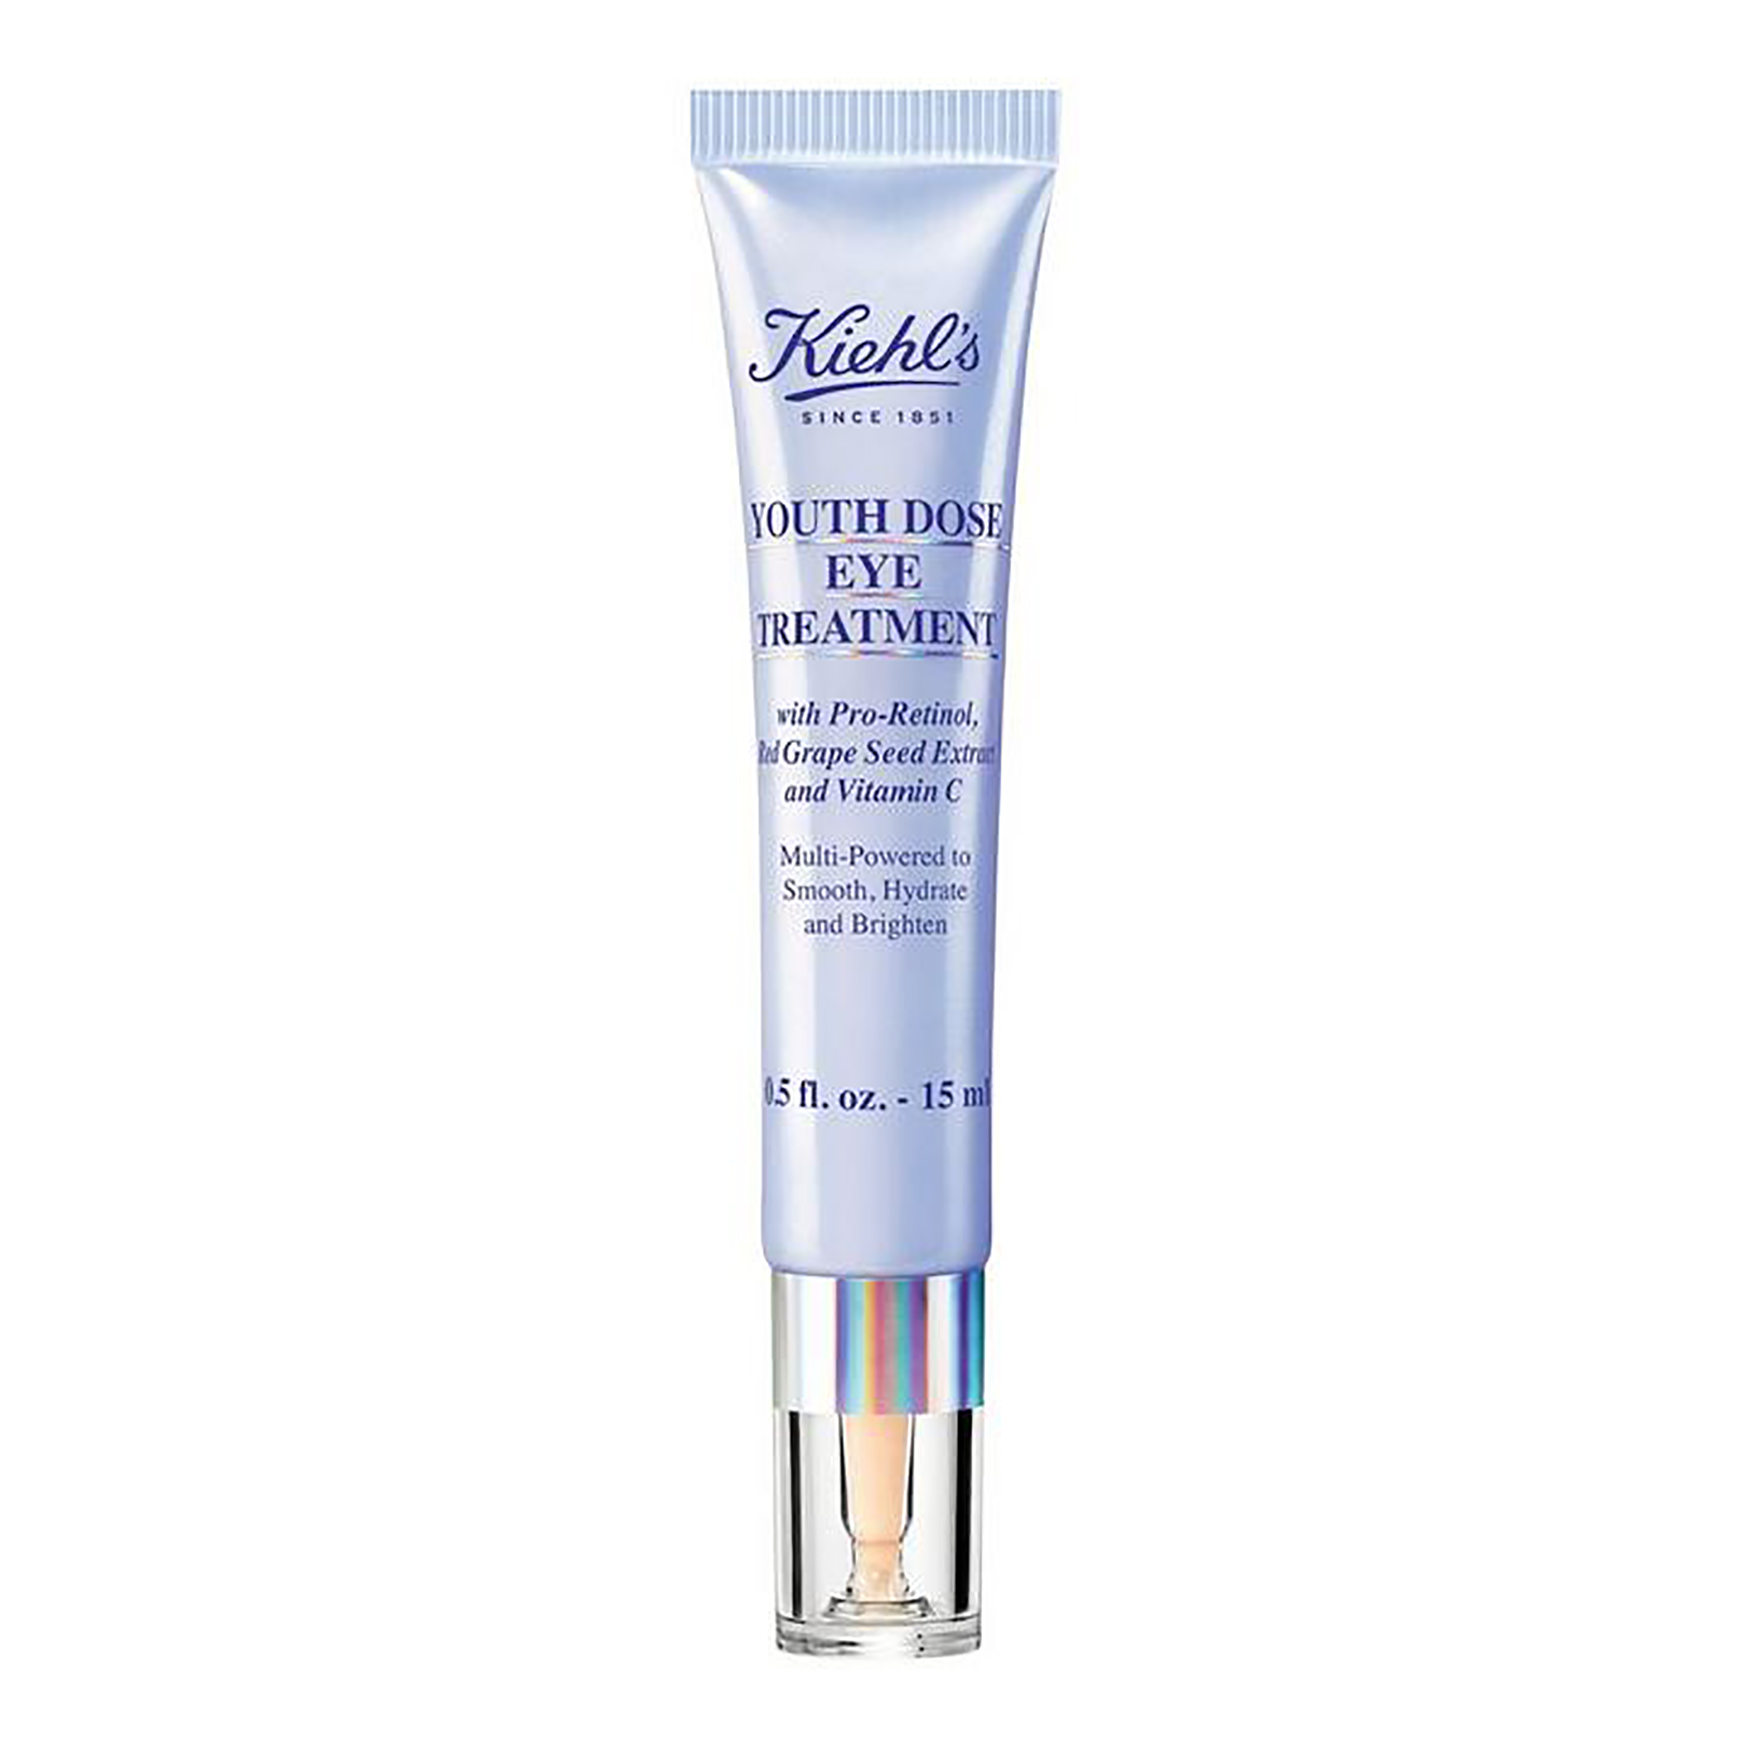 Kiehl's Youth Dose Eye Treatment | Space NK